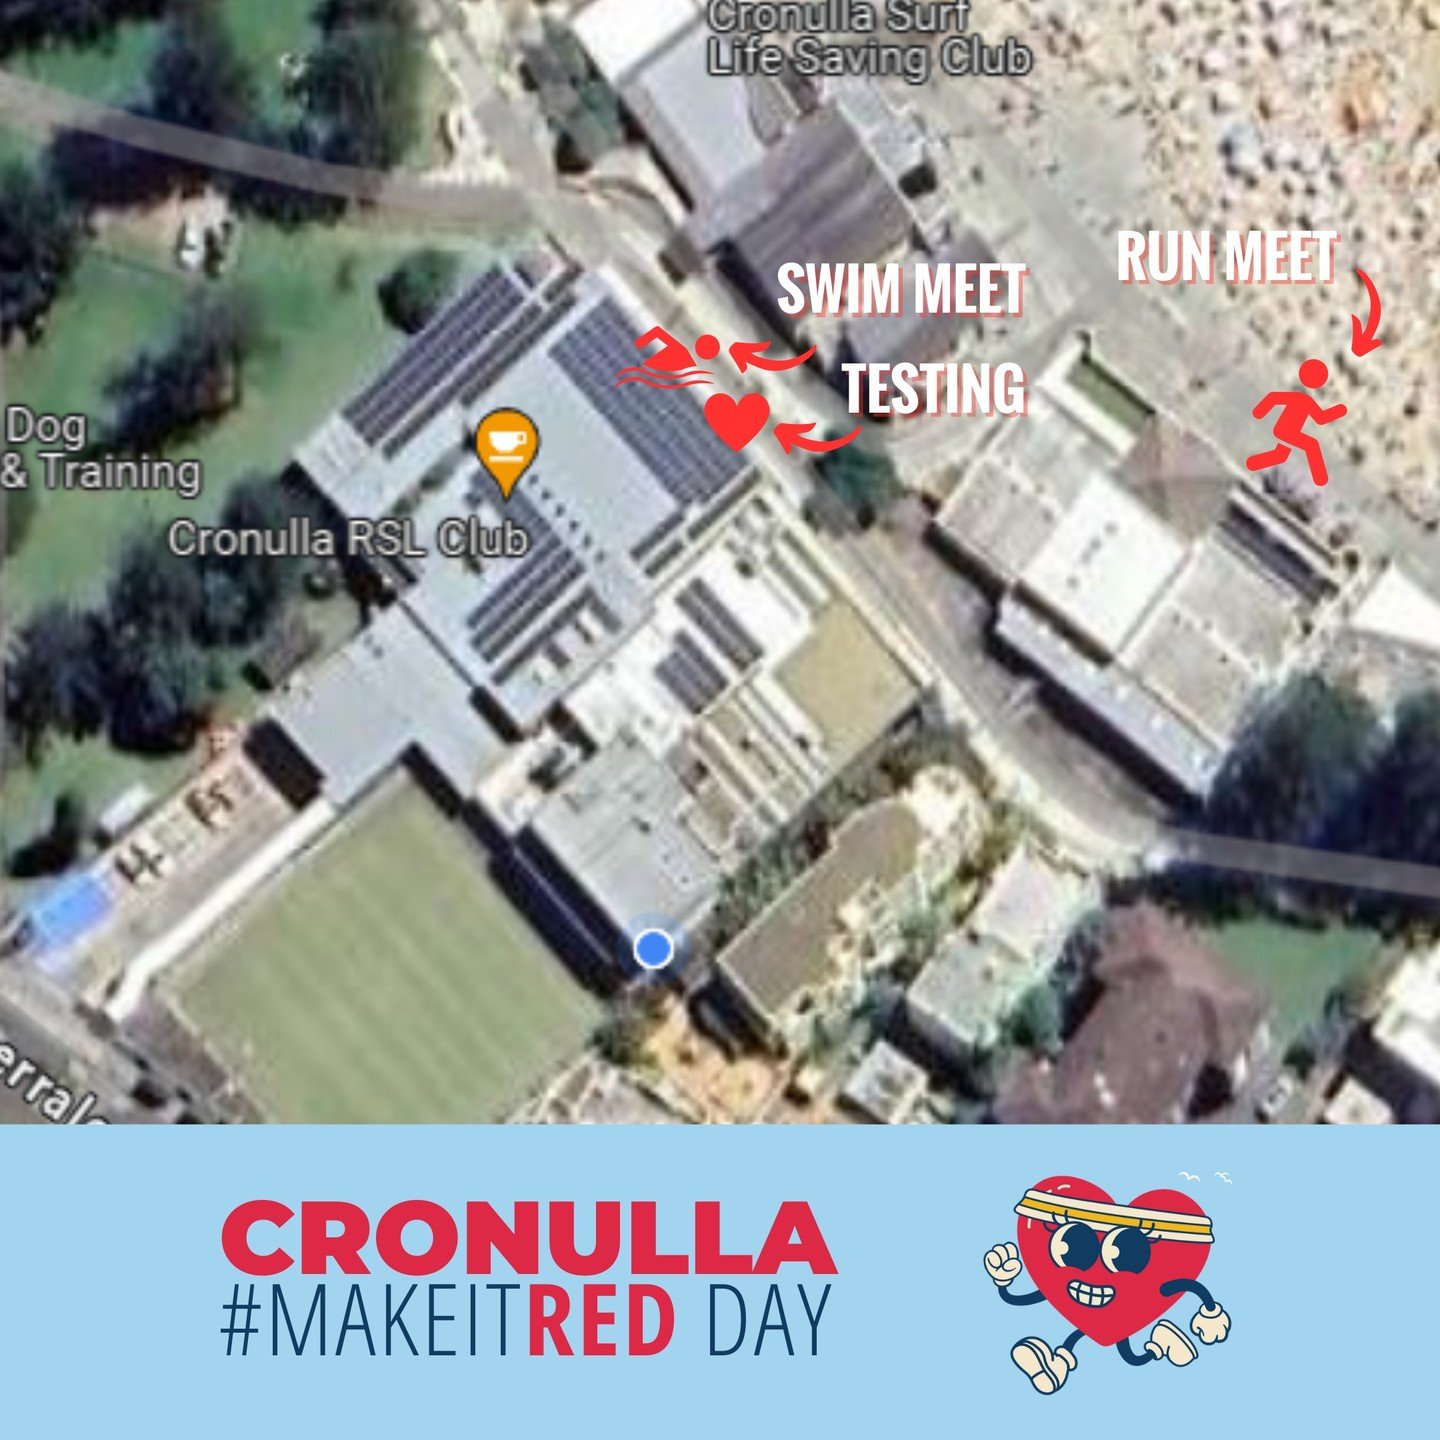 We won&rsquo;t be letting the weather stop our quest to raise awareness for heart health, tomorrow we will #MakeItRed Cronulla.

🏃🏼 Run/Walk: Bobby&rsquo;s South Cronulla (The Esplanade), 6:45am for a 7:00am start.
South Cronulla to Wanda Surf Club